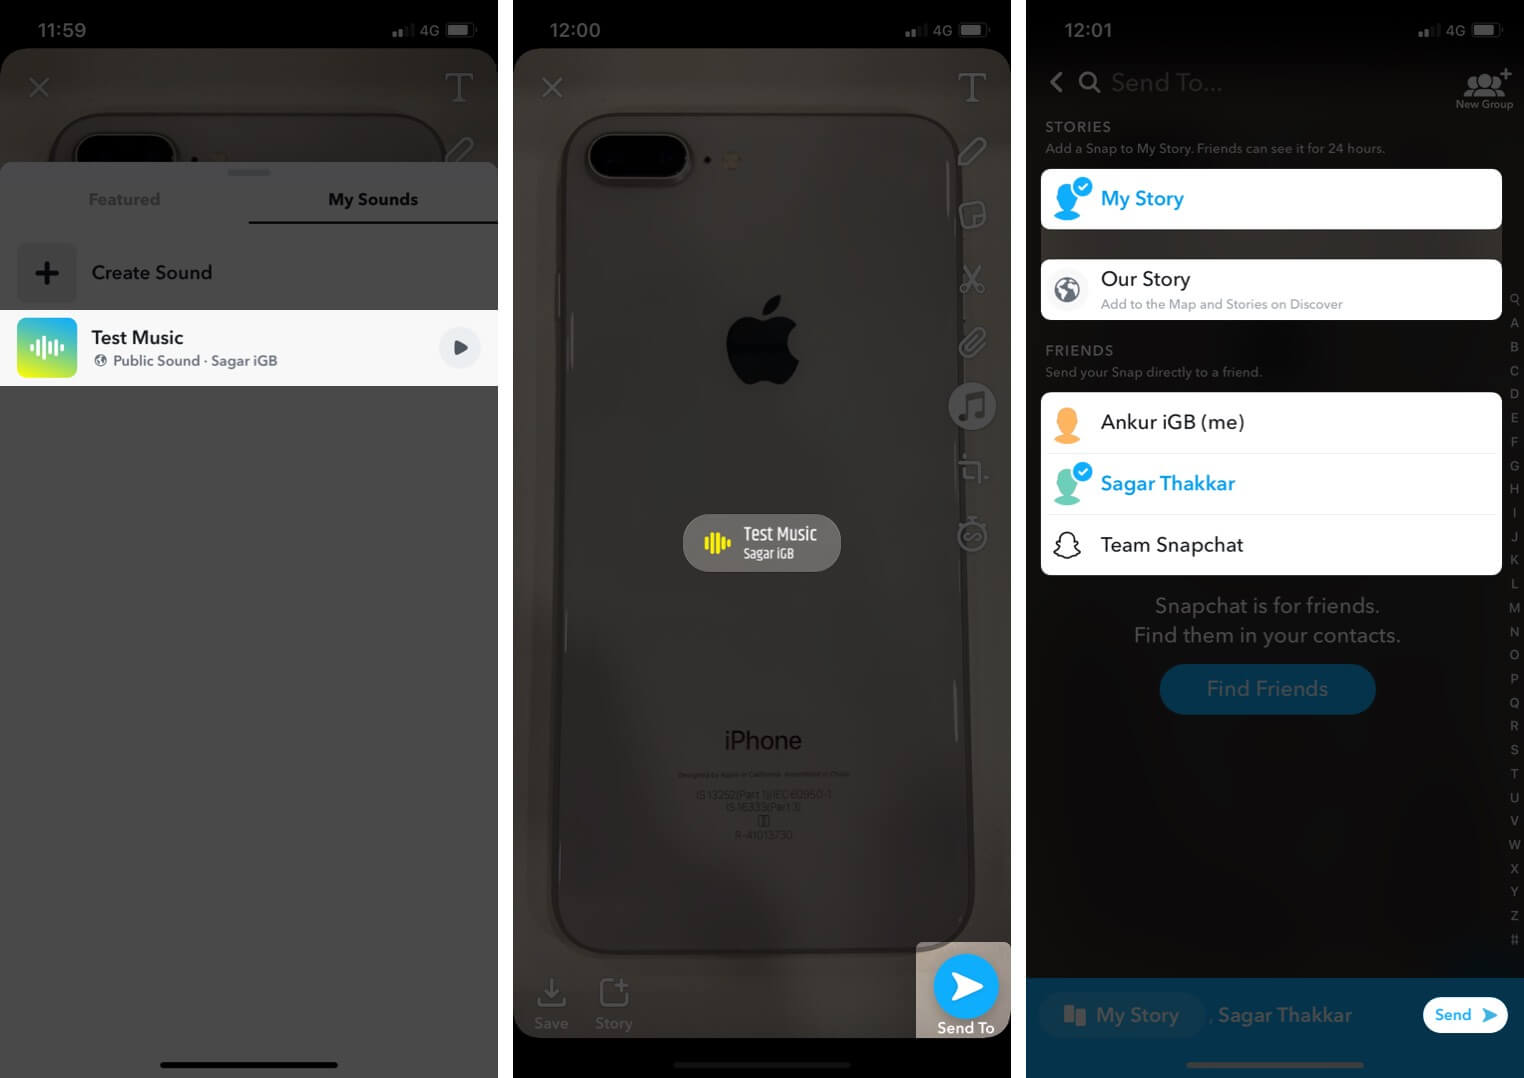 Select Created Sound and Tap on Send to Share it on Snapchat